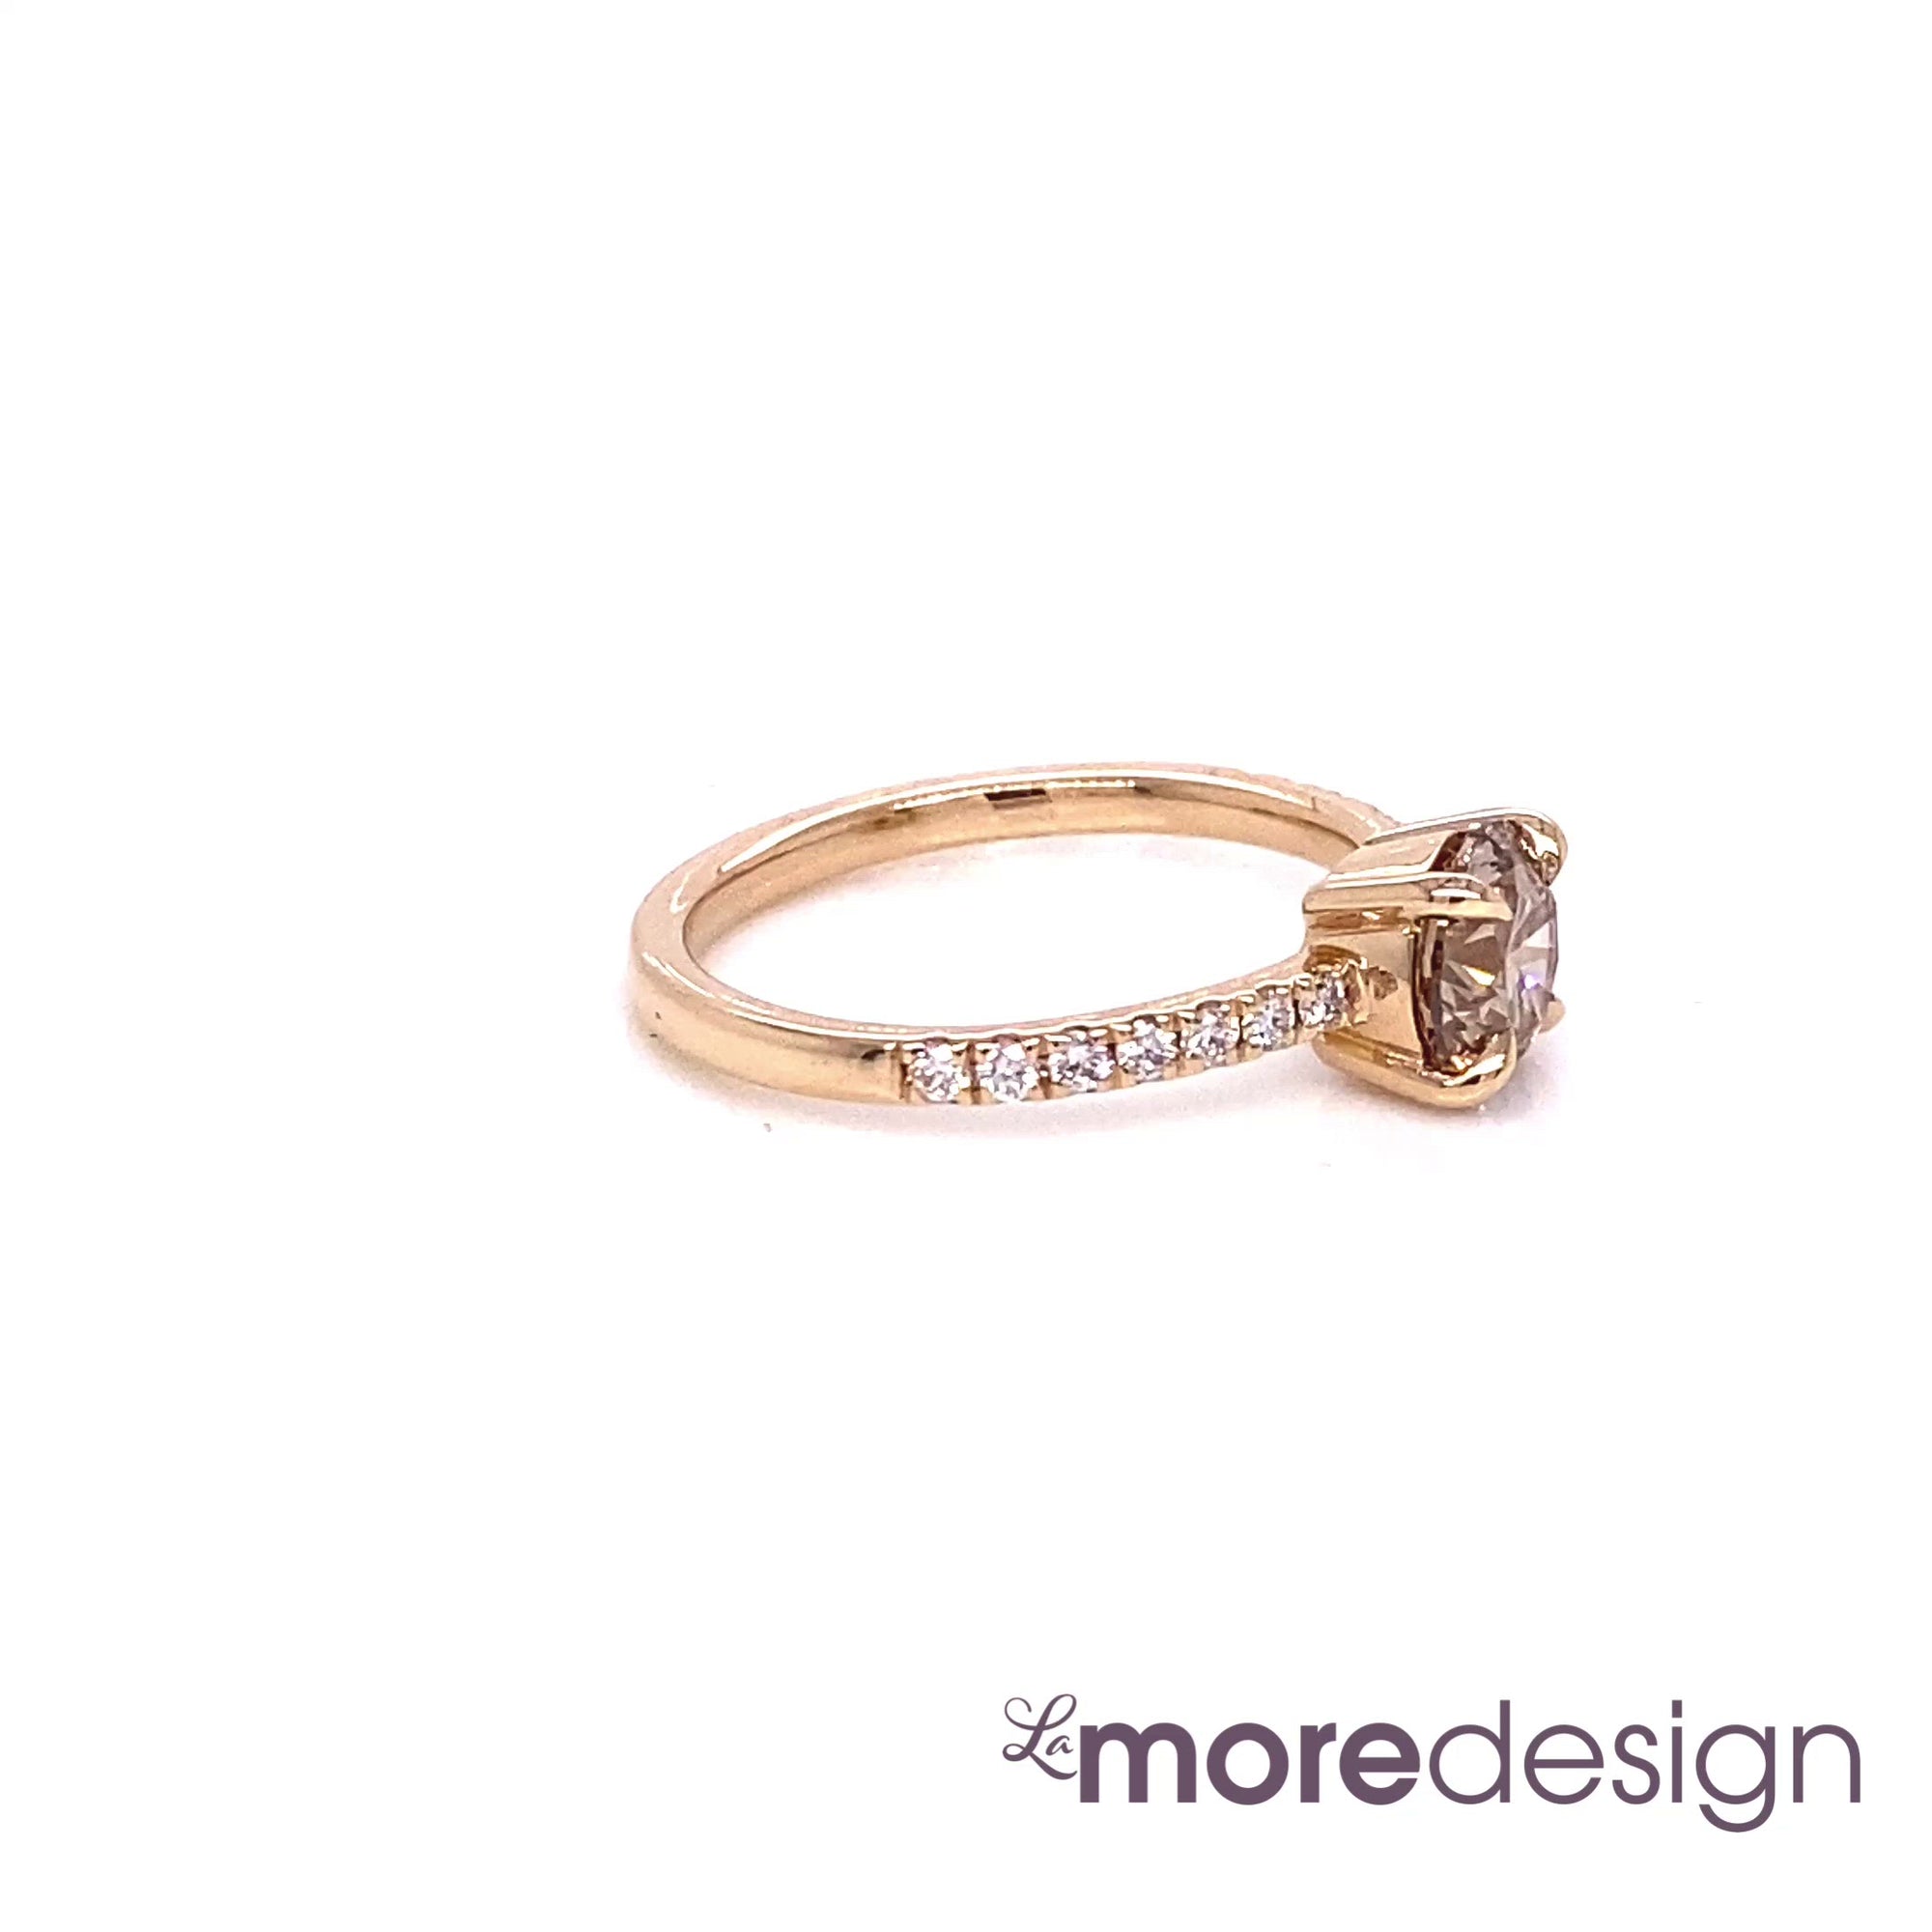 This stunningly gorgeous champagne diamond engagement ring features a 1.01 carat round cut natural champagne diamond set in a 14k rose gold flat set low profile solitaire ring setting which lays flat perfectly on top of your finger for comfortable wear.   All our curved wedding bands can nest beautifully with this low profile solitaire engagement ring!